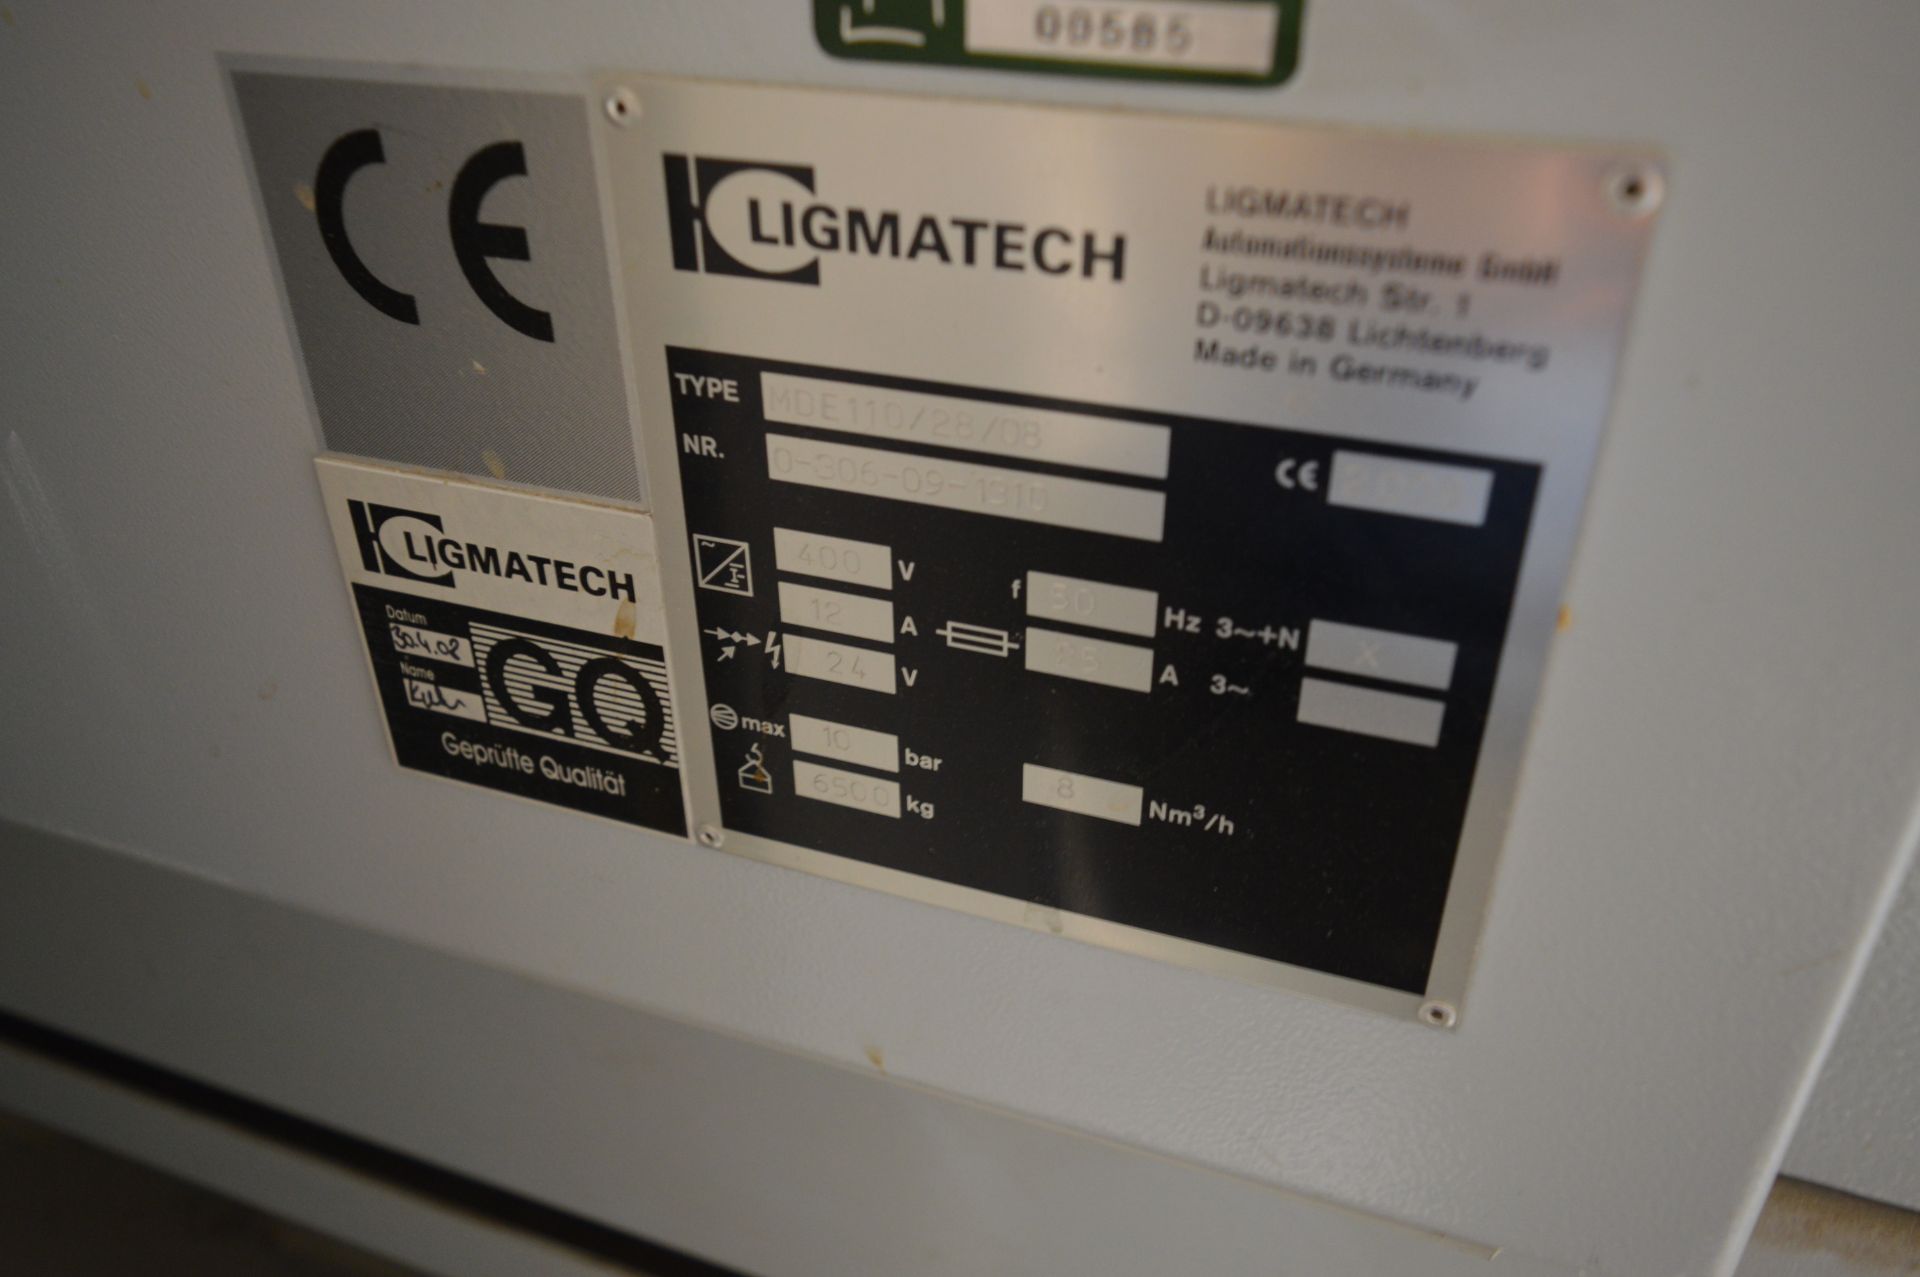 Ligmatech, Optimat MDE 110/28/08 CNC carcass clamping machine, Serial No. 0-306-09-1310 (2008) - Image 9 of 10